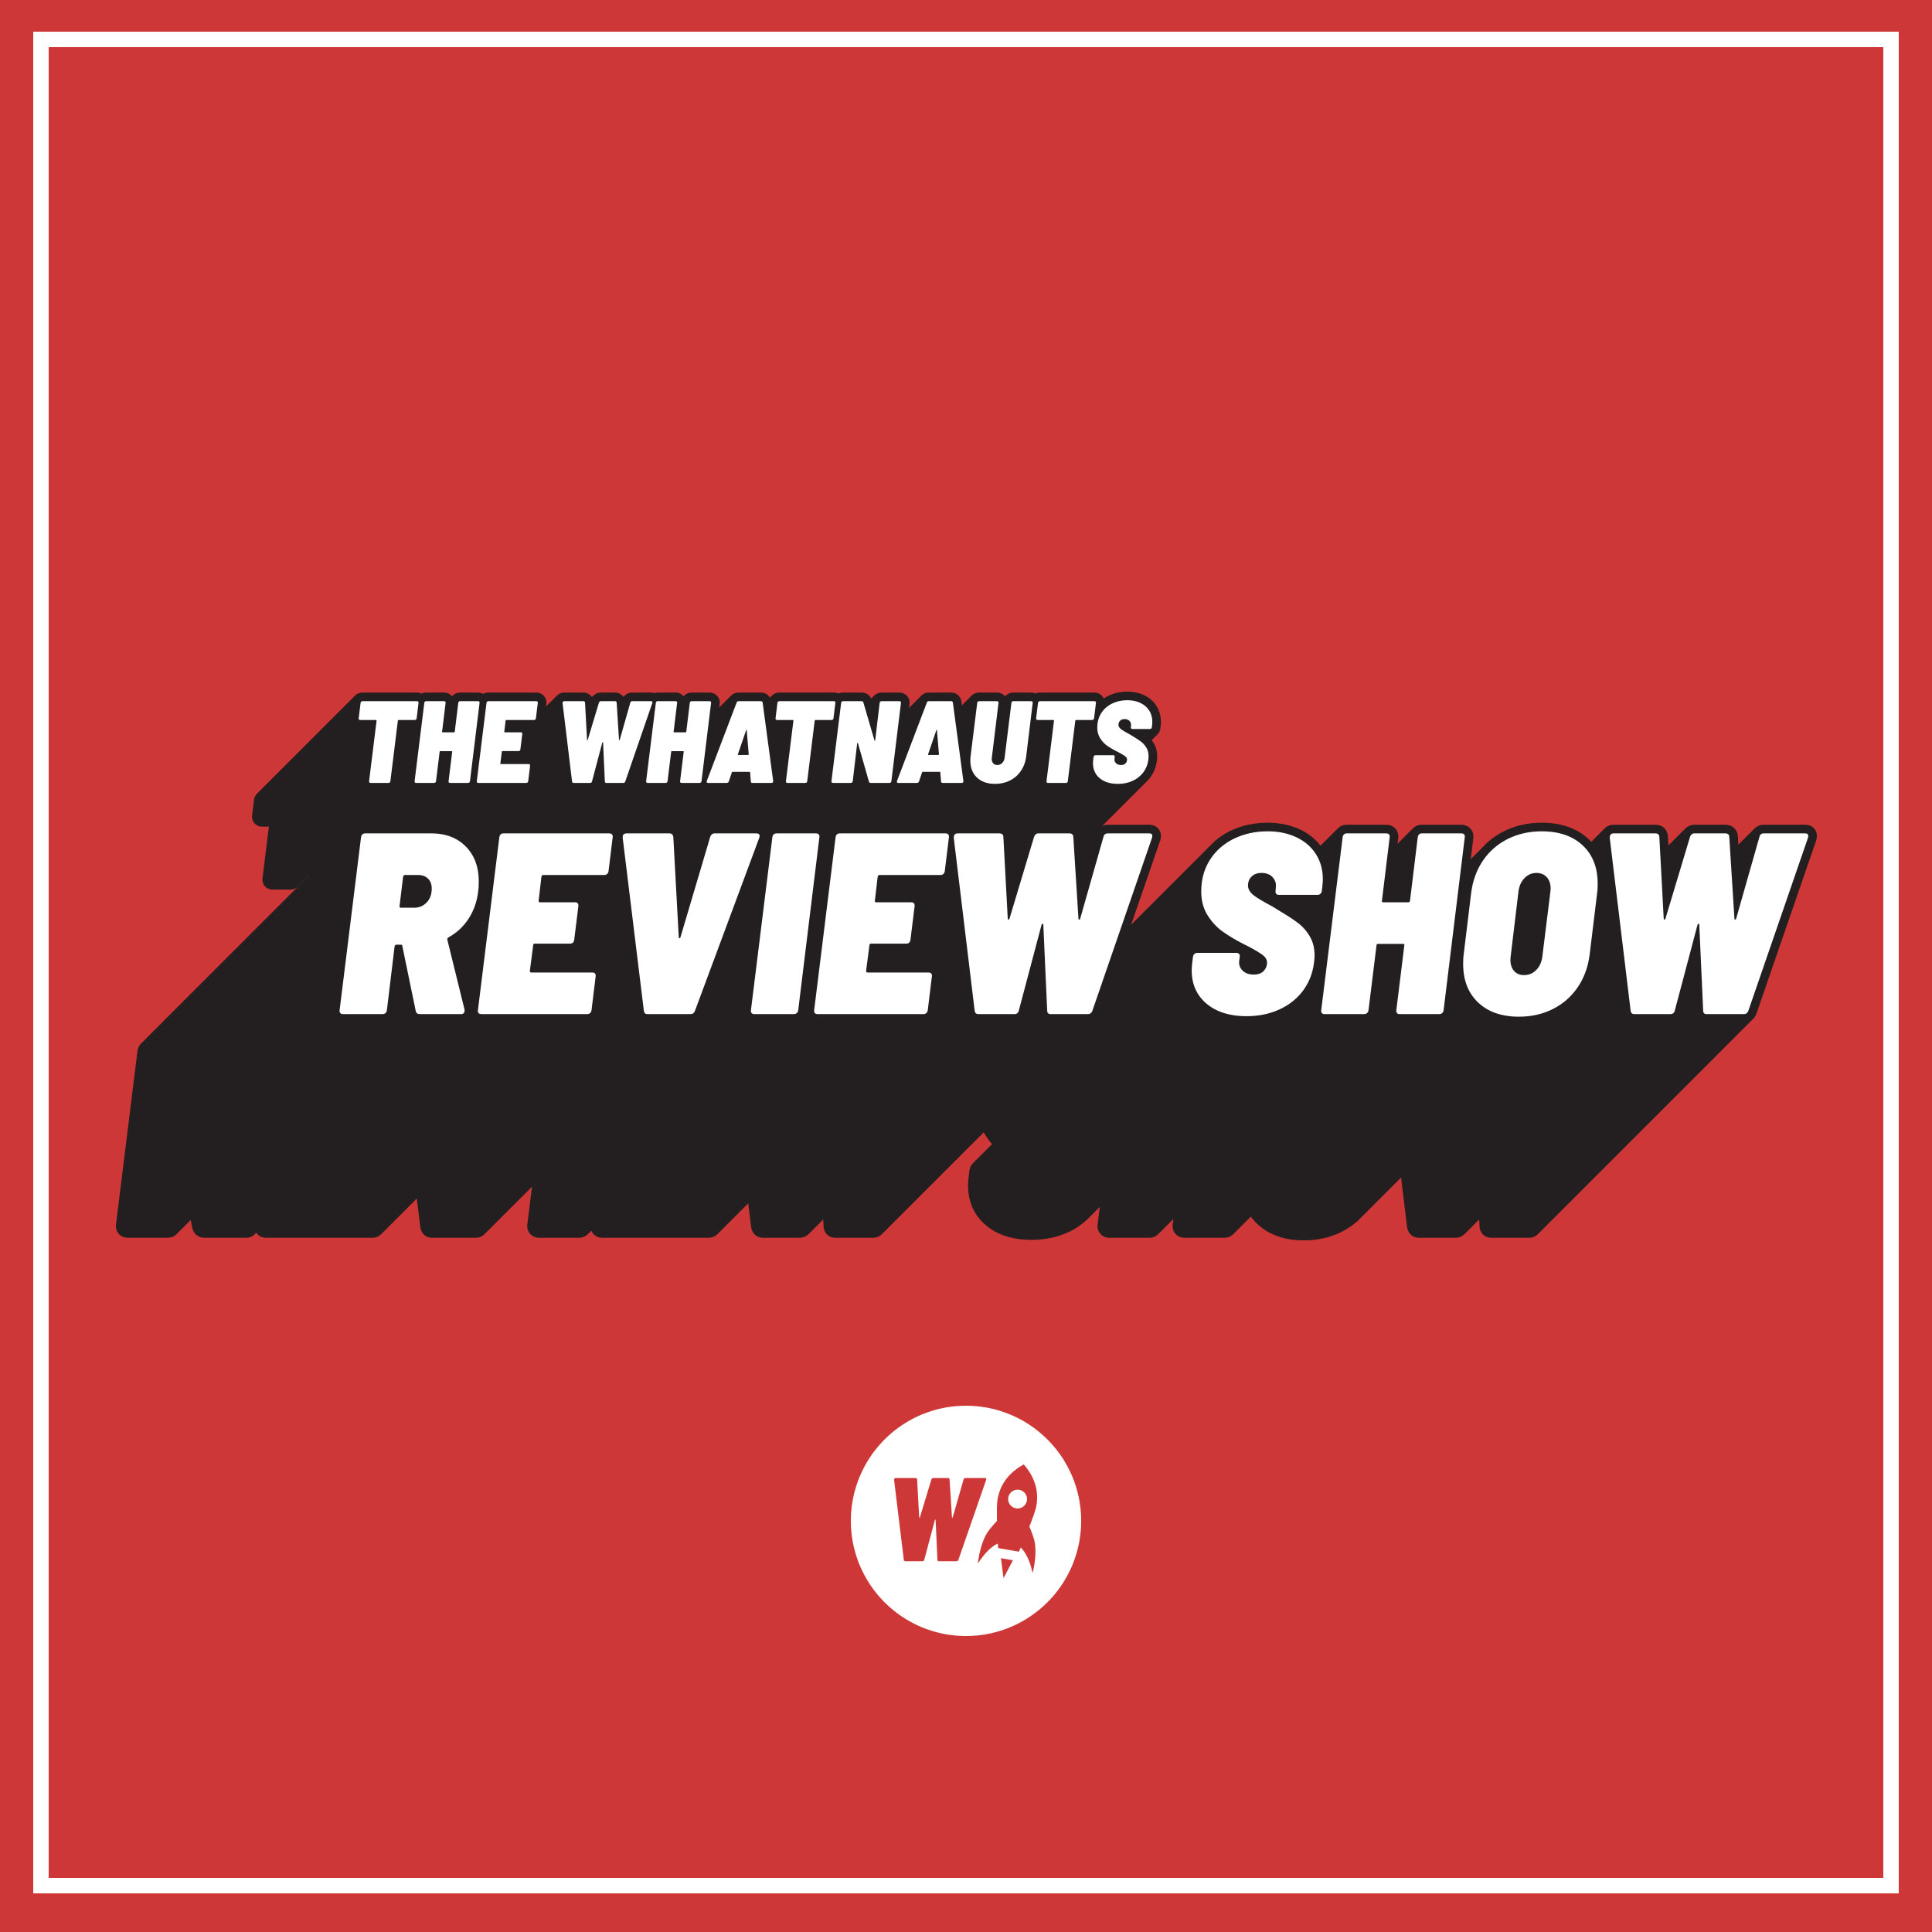 The Review Show